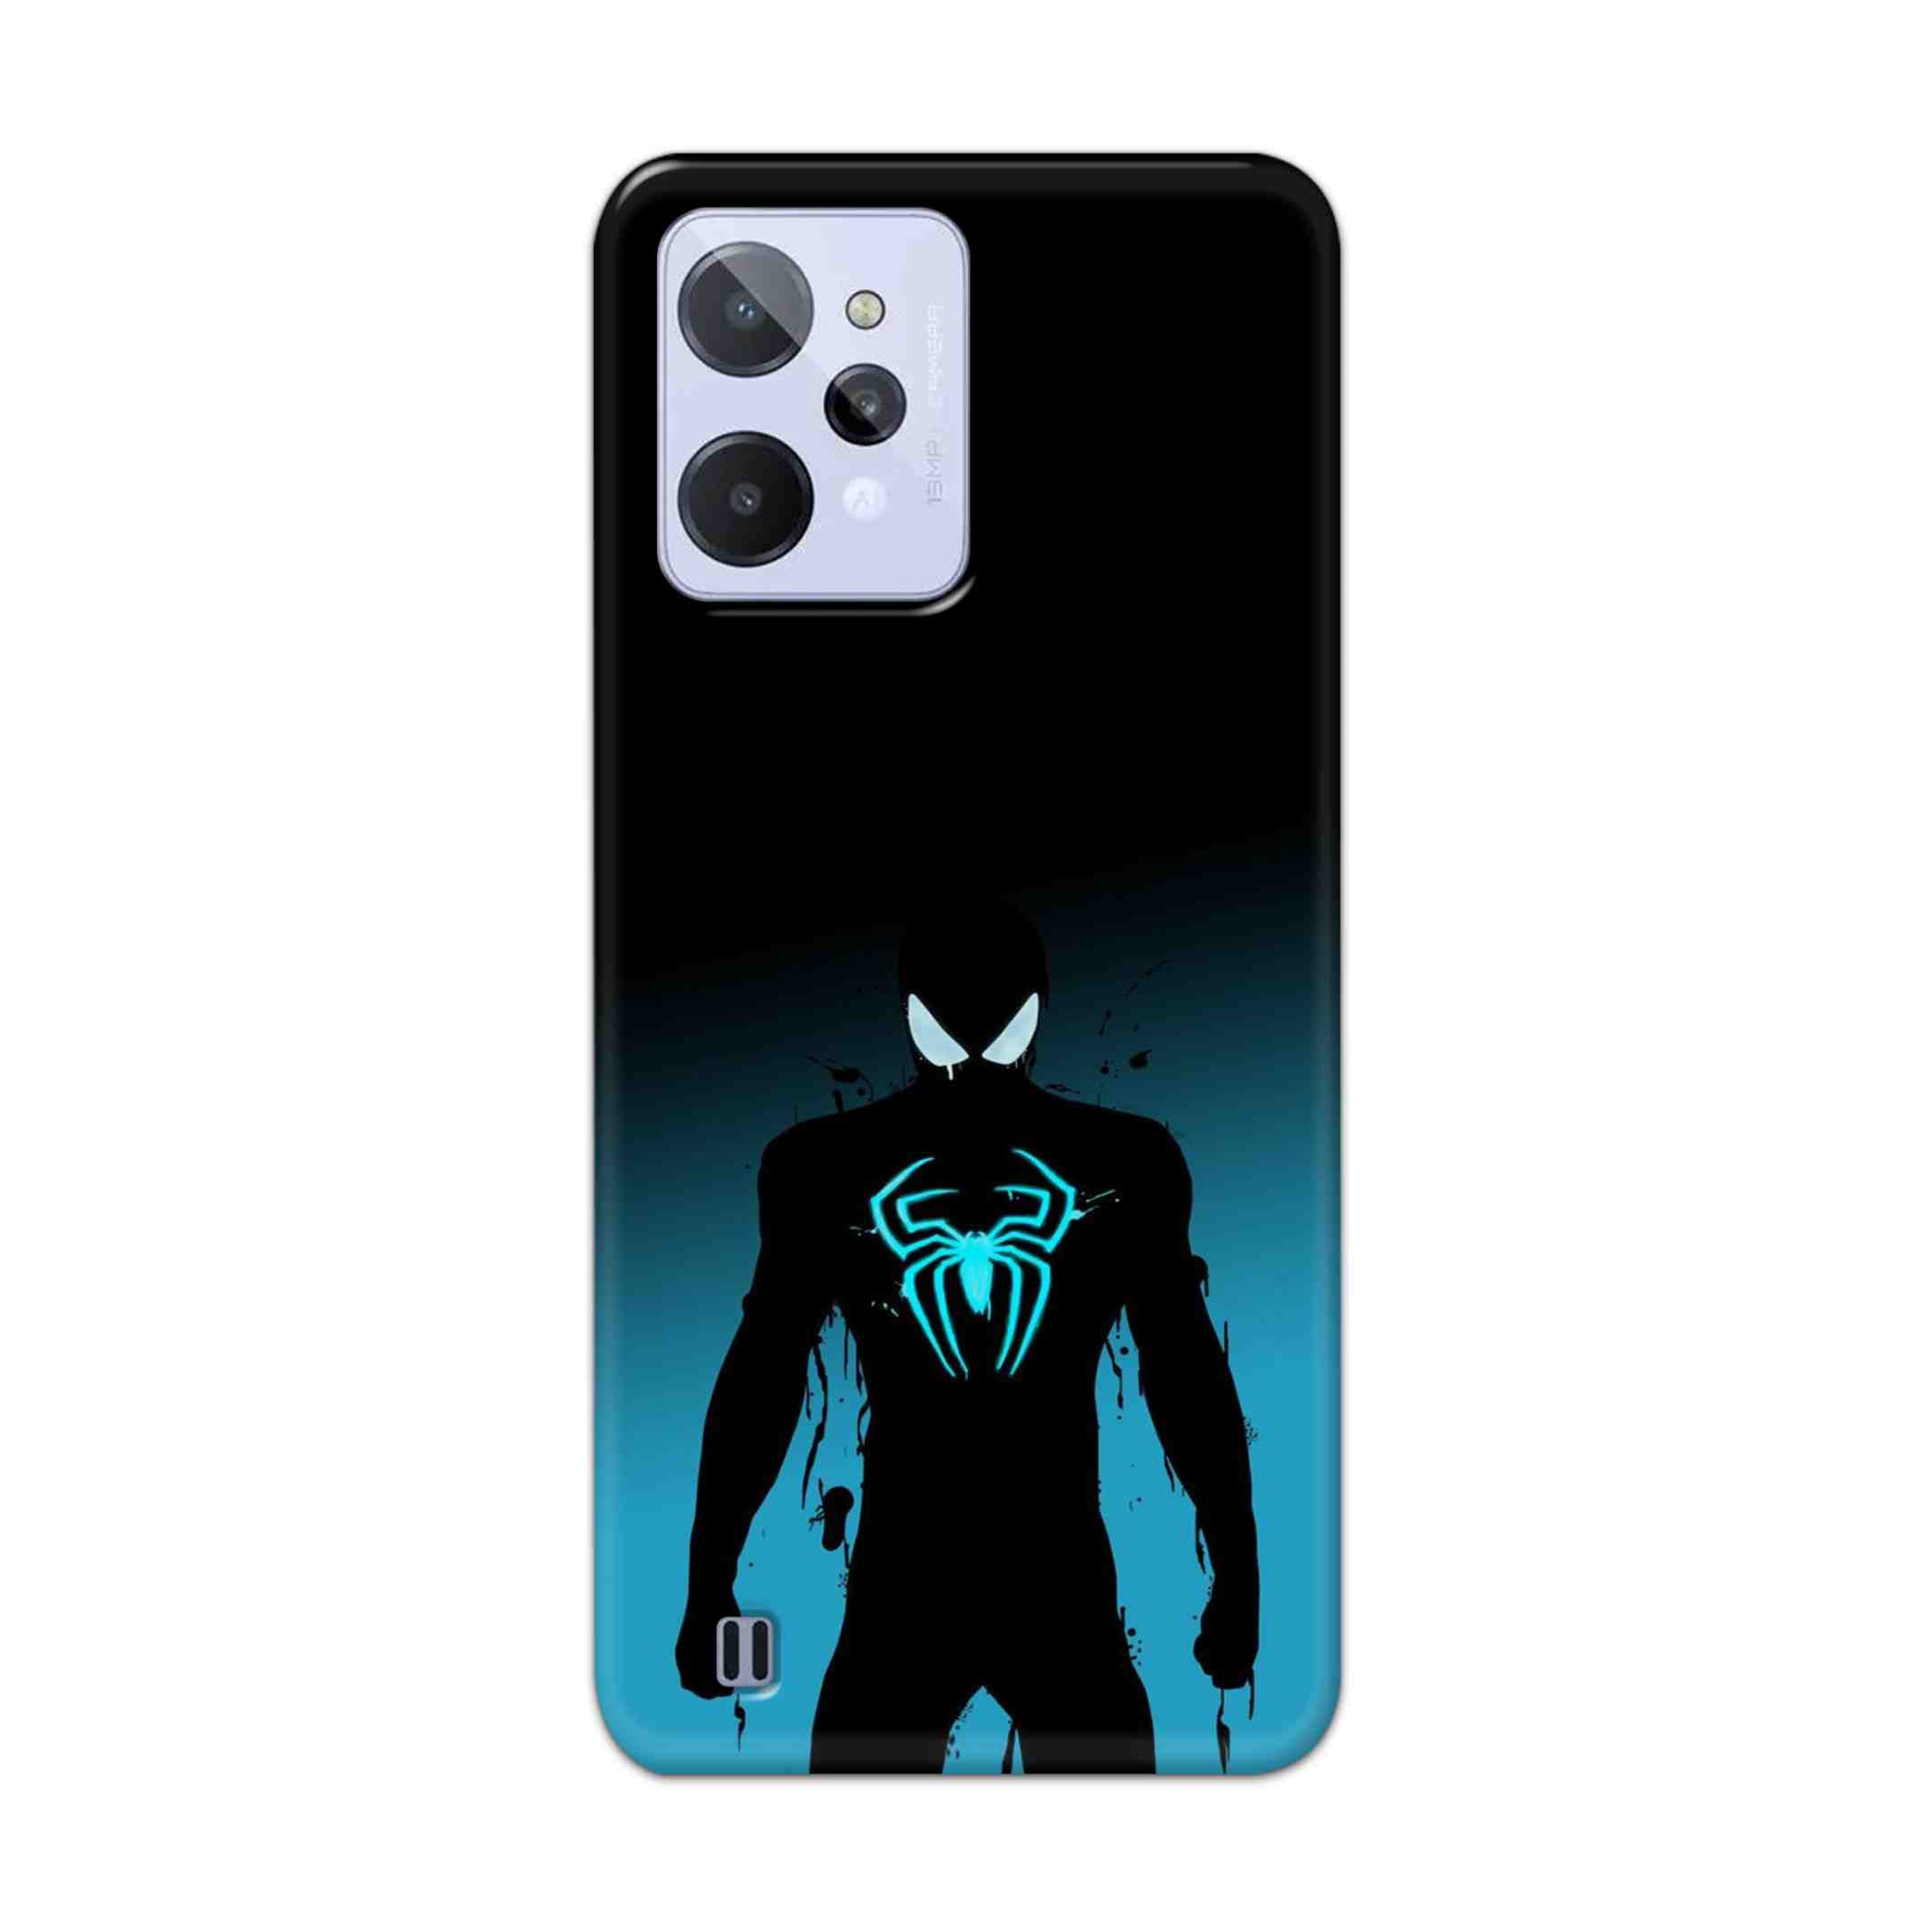 Buy Neon Spiderman Hard Back Mobile Phone Case Cover For Realme C31 Online